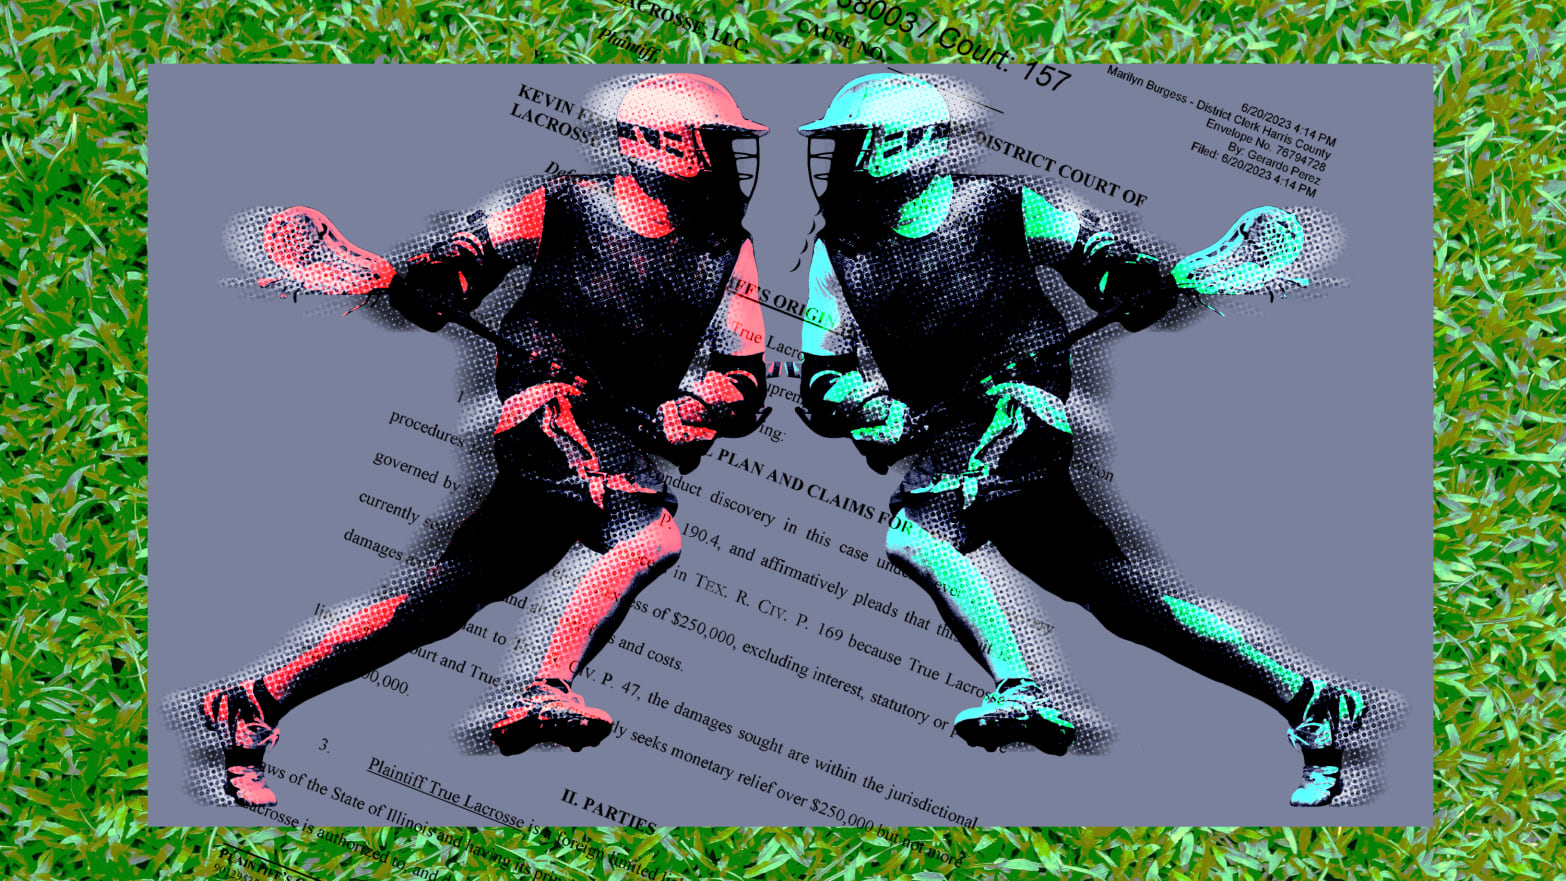 A photo illustration of two lacrosse players running at each other with court documents in the background.